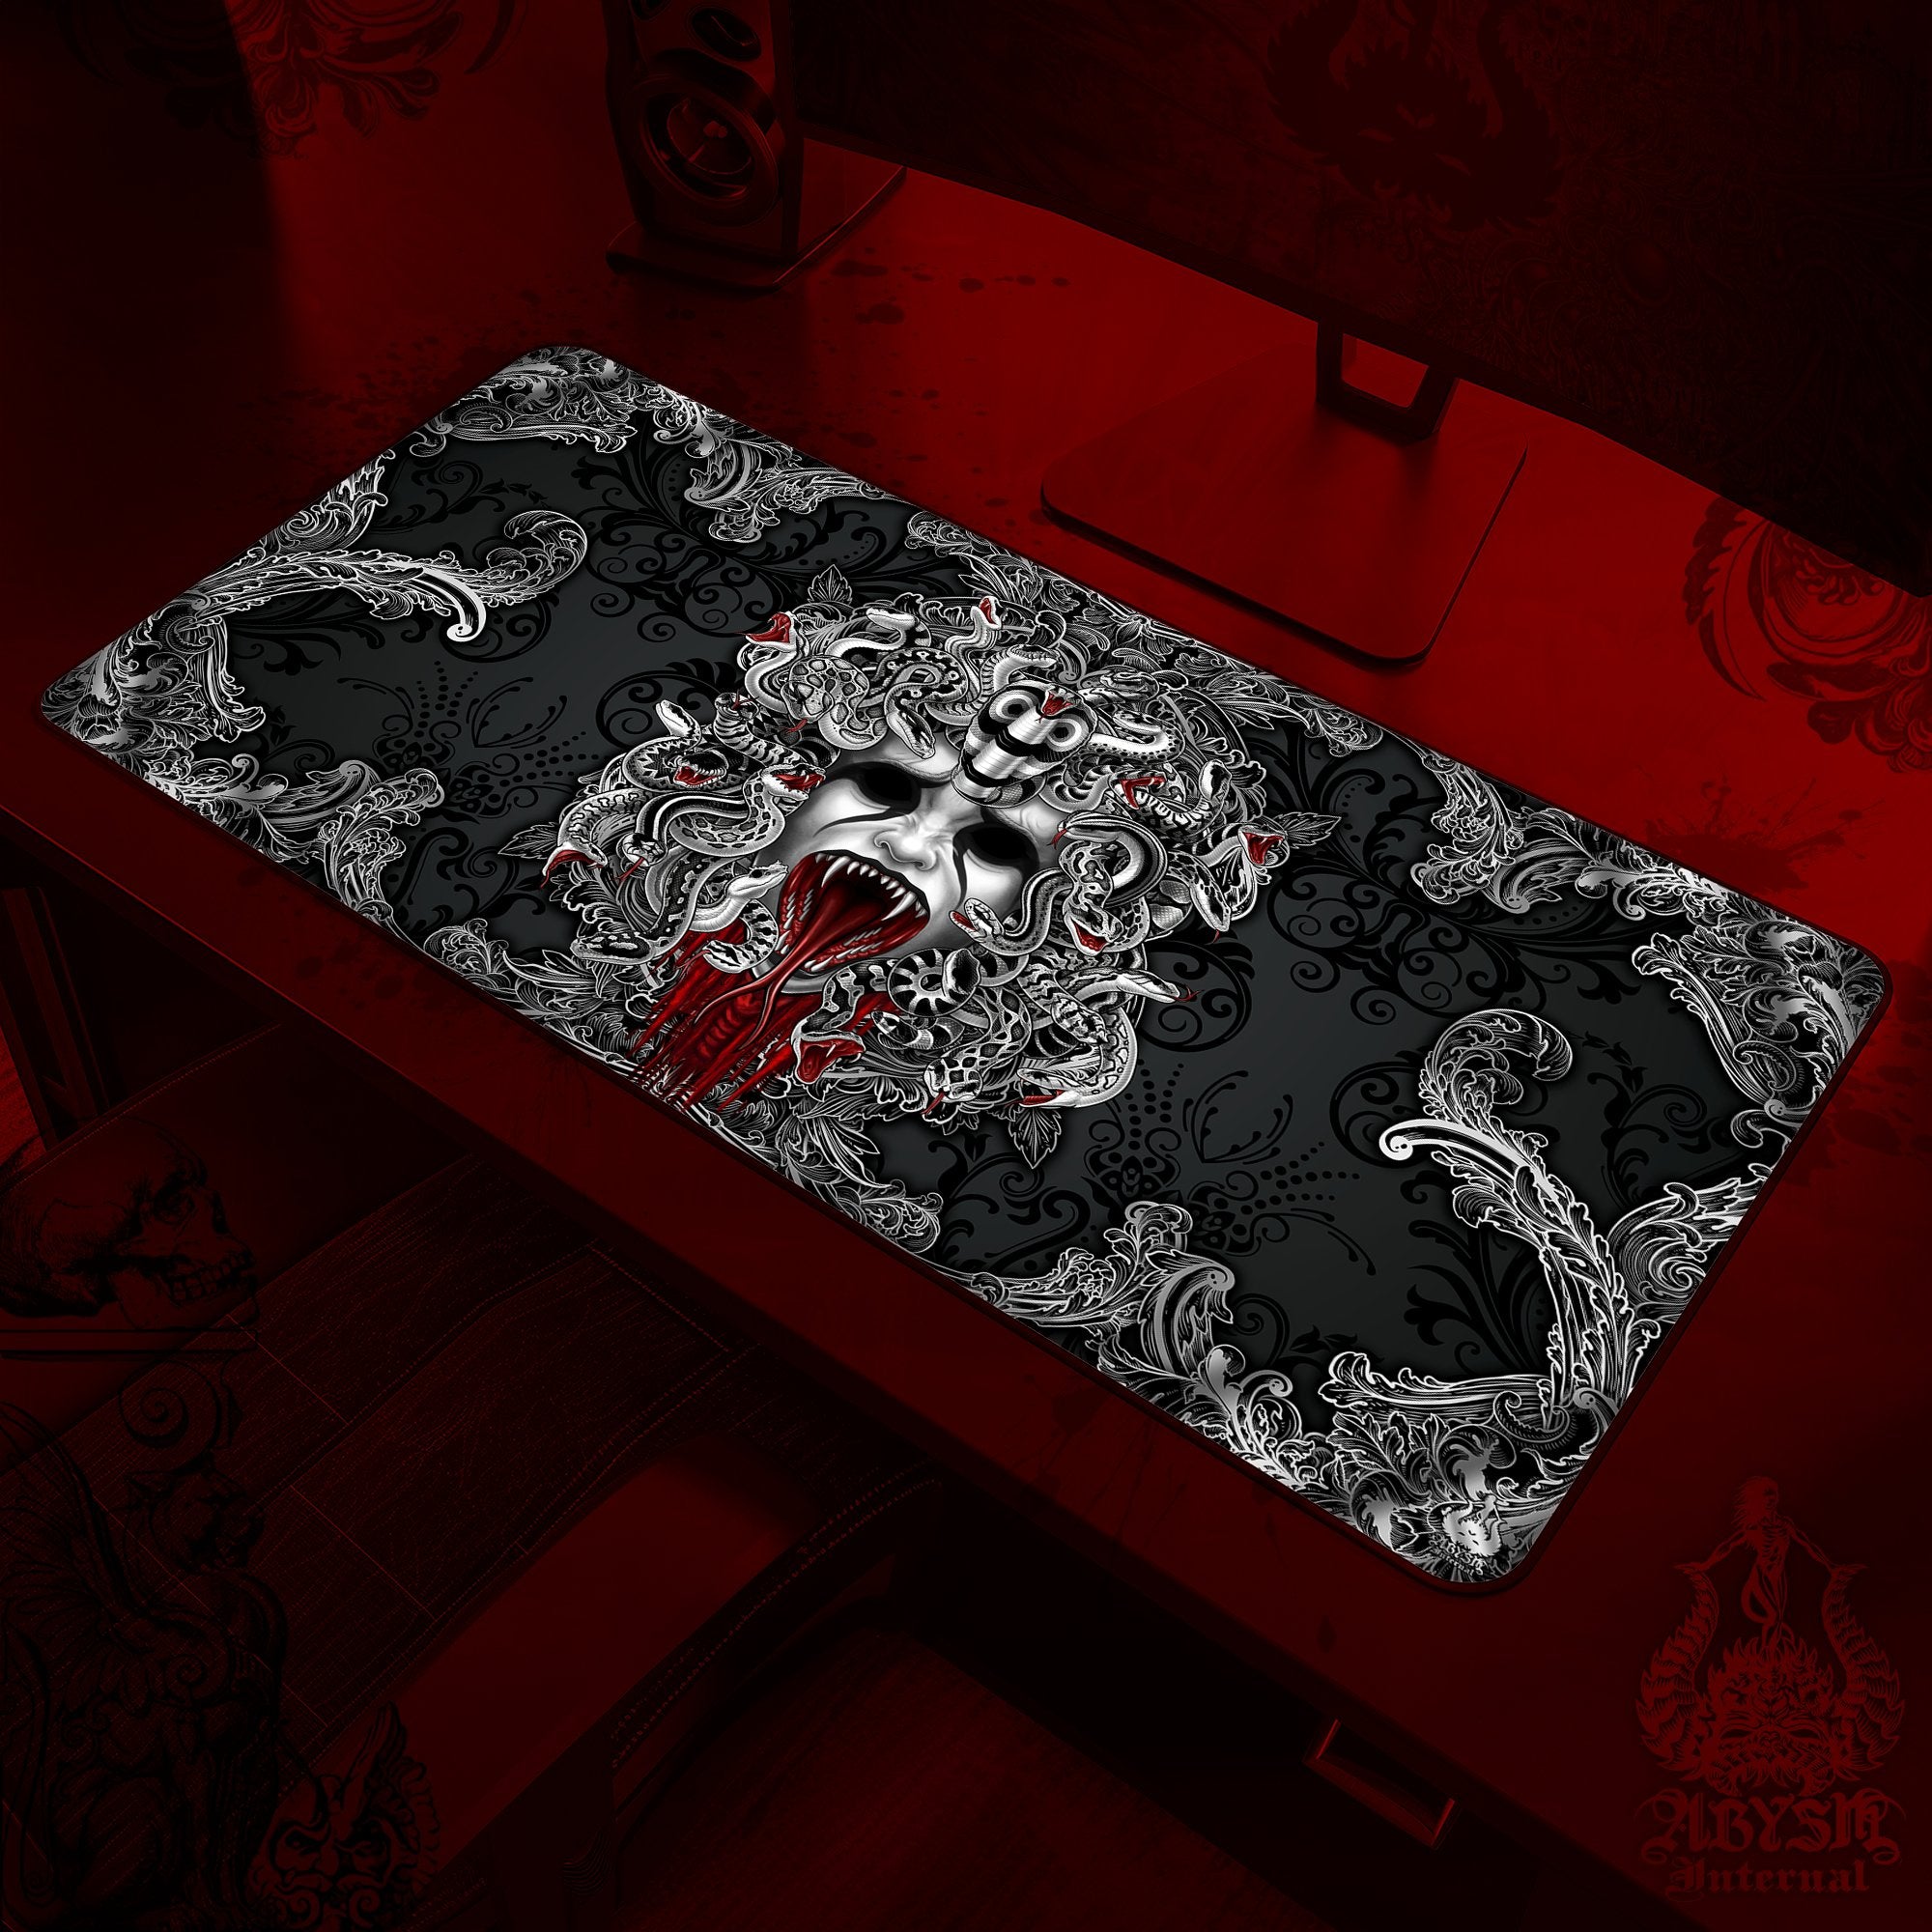 Gothic Gaming Mouse Pad, Medusa Skull Desk Mat, Gamer Table Protector Cover, Nu Goth Workpad, Dark Fantasy Art Print - 3 Colors, 2 Faces - Abysm Internal